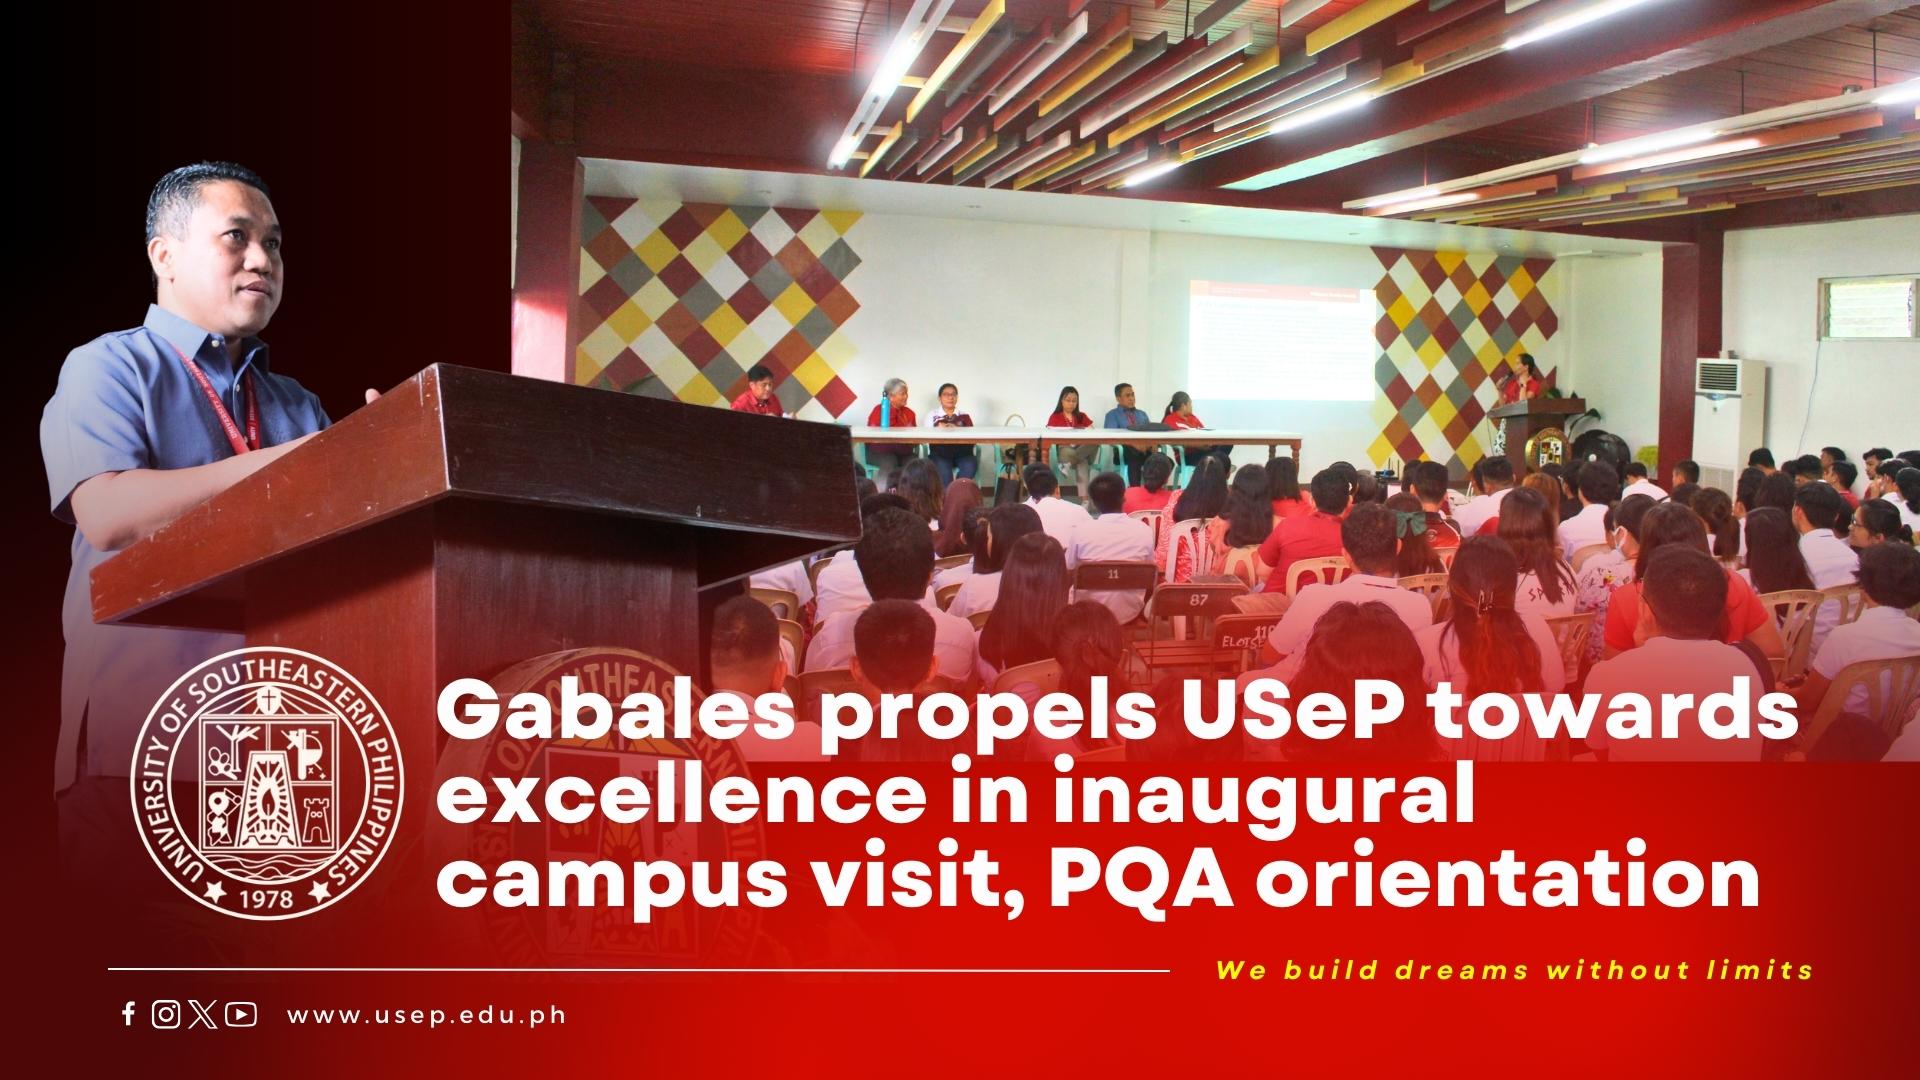 Gabales propels USeP towards excellence in inaugural campus visit, PQA orientation